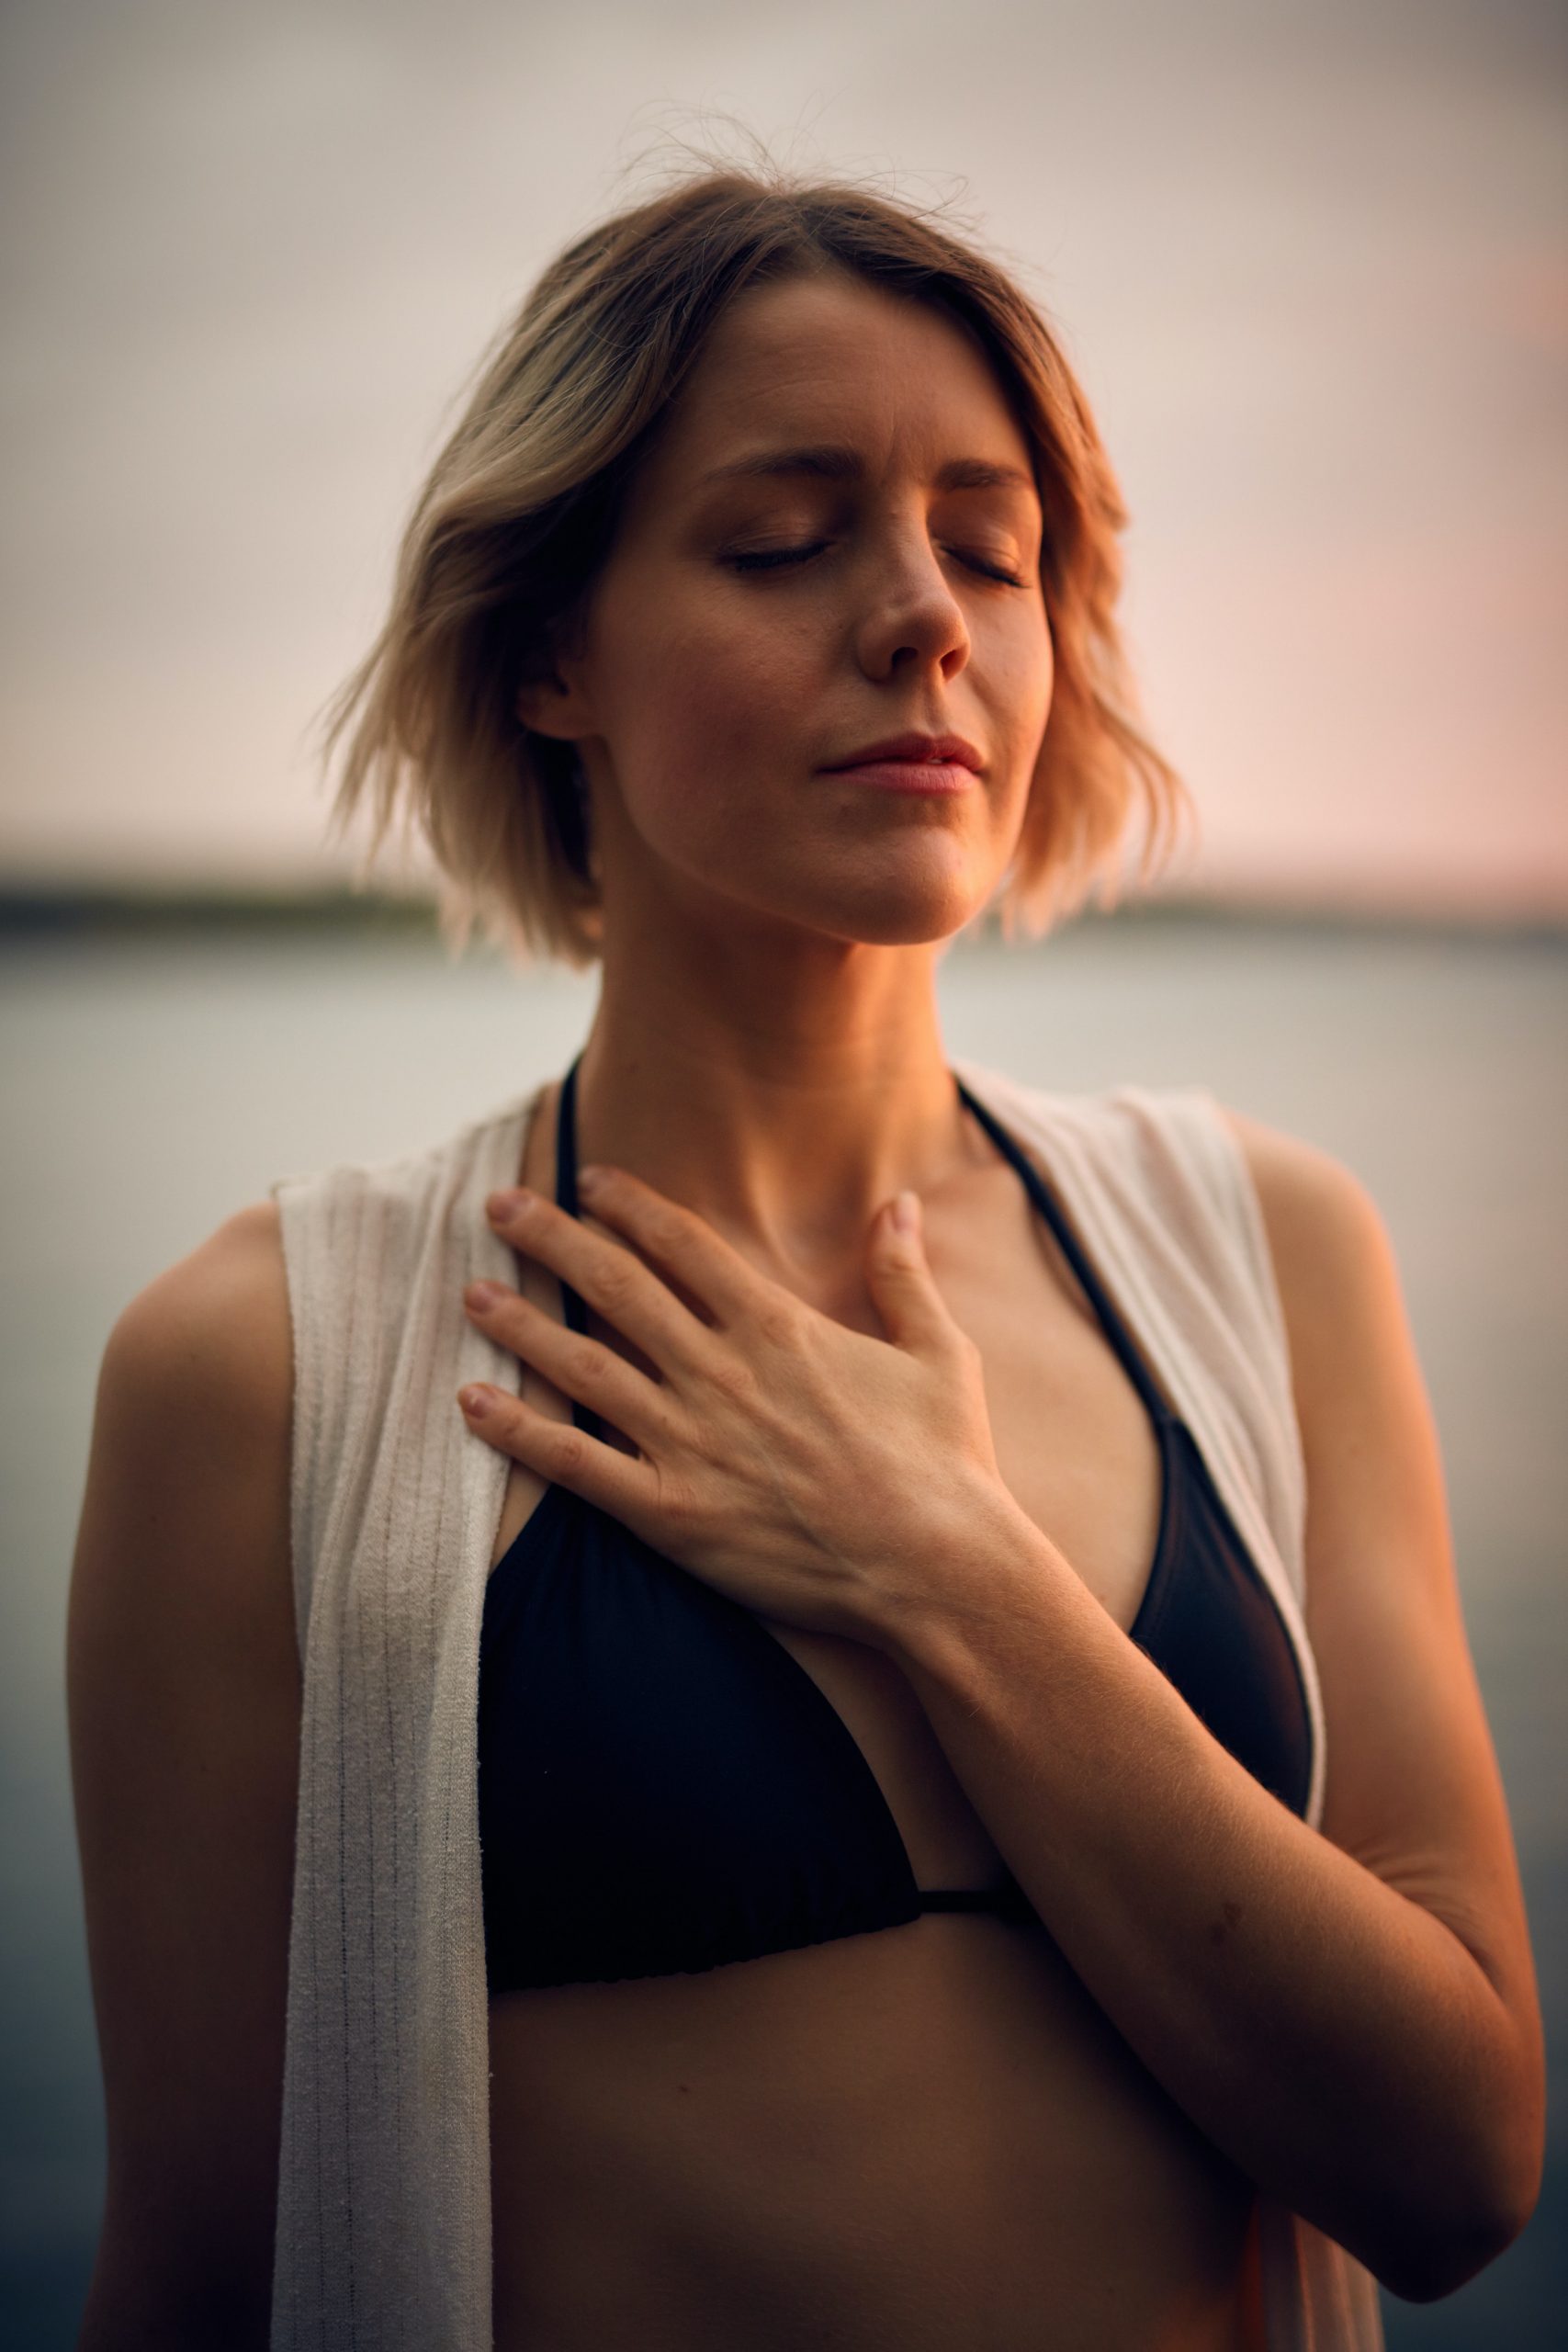 A woman stands outdoors by the water, with her eyes closed and one hand placed on her chest. She has short blonde hair and is wearing a black bikini top and an open white cover-up. The serene backdrop of the sunset over the tranquil water underscores her peaceful moment, reminiscent of trauma treatment at Khiron Clinics.